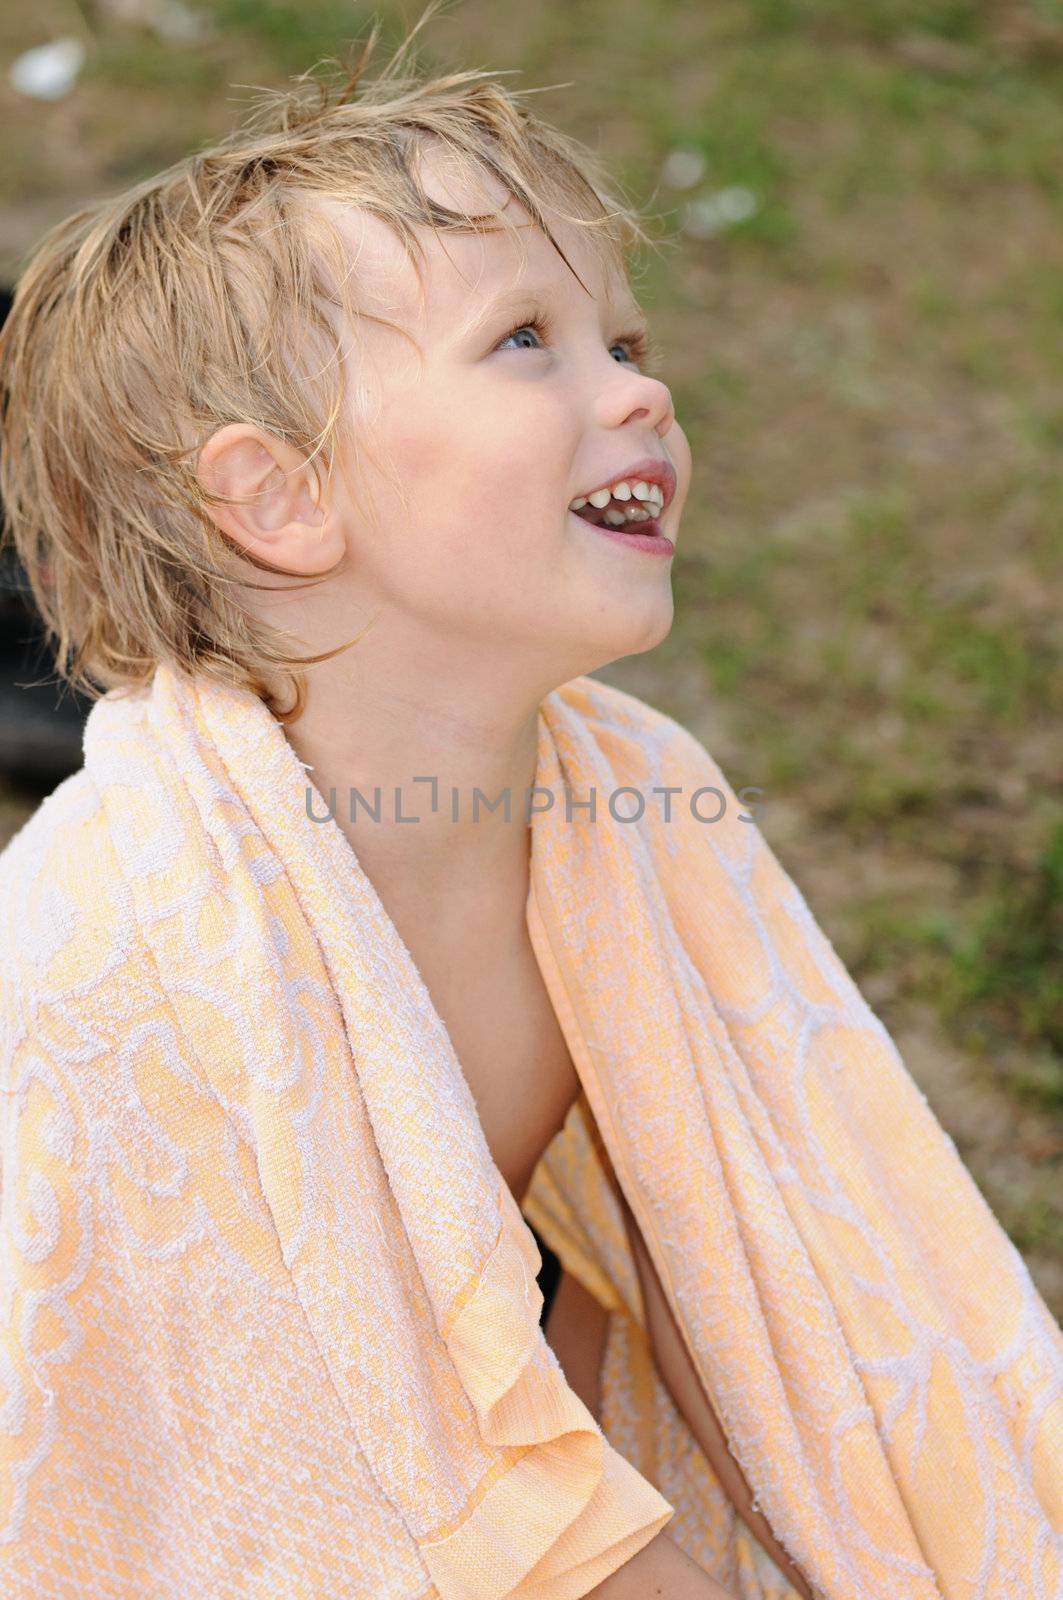 Smiling the wet child wrapped up in a towel